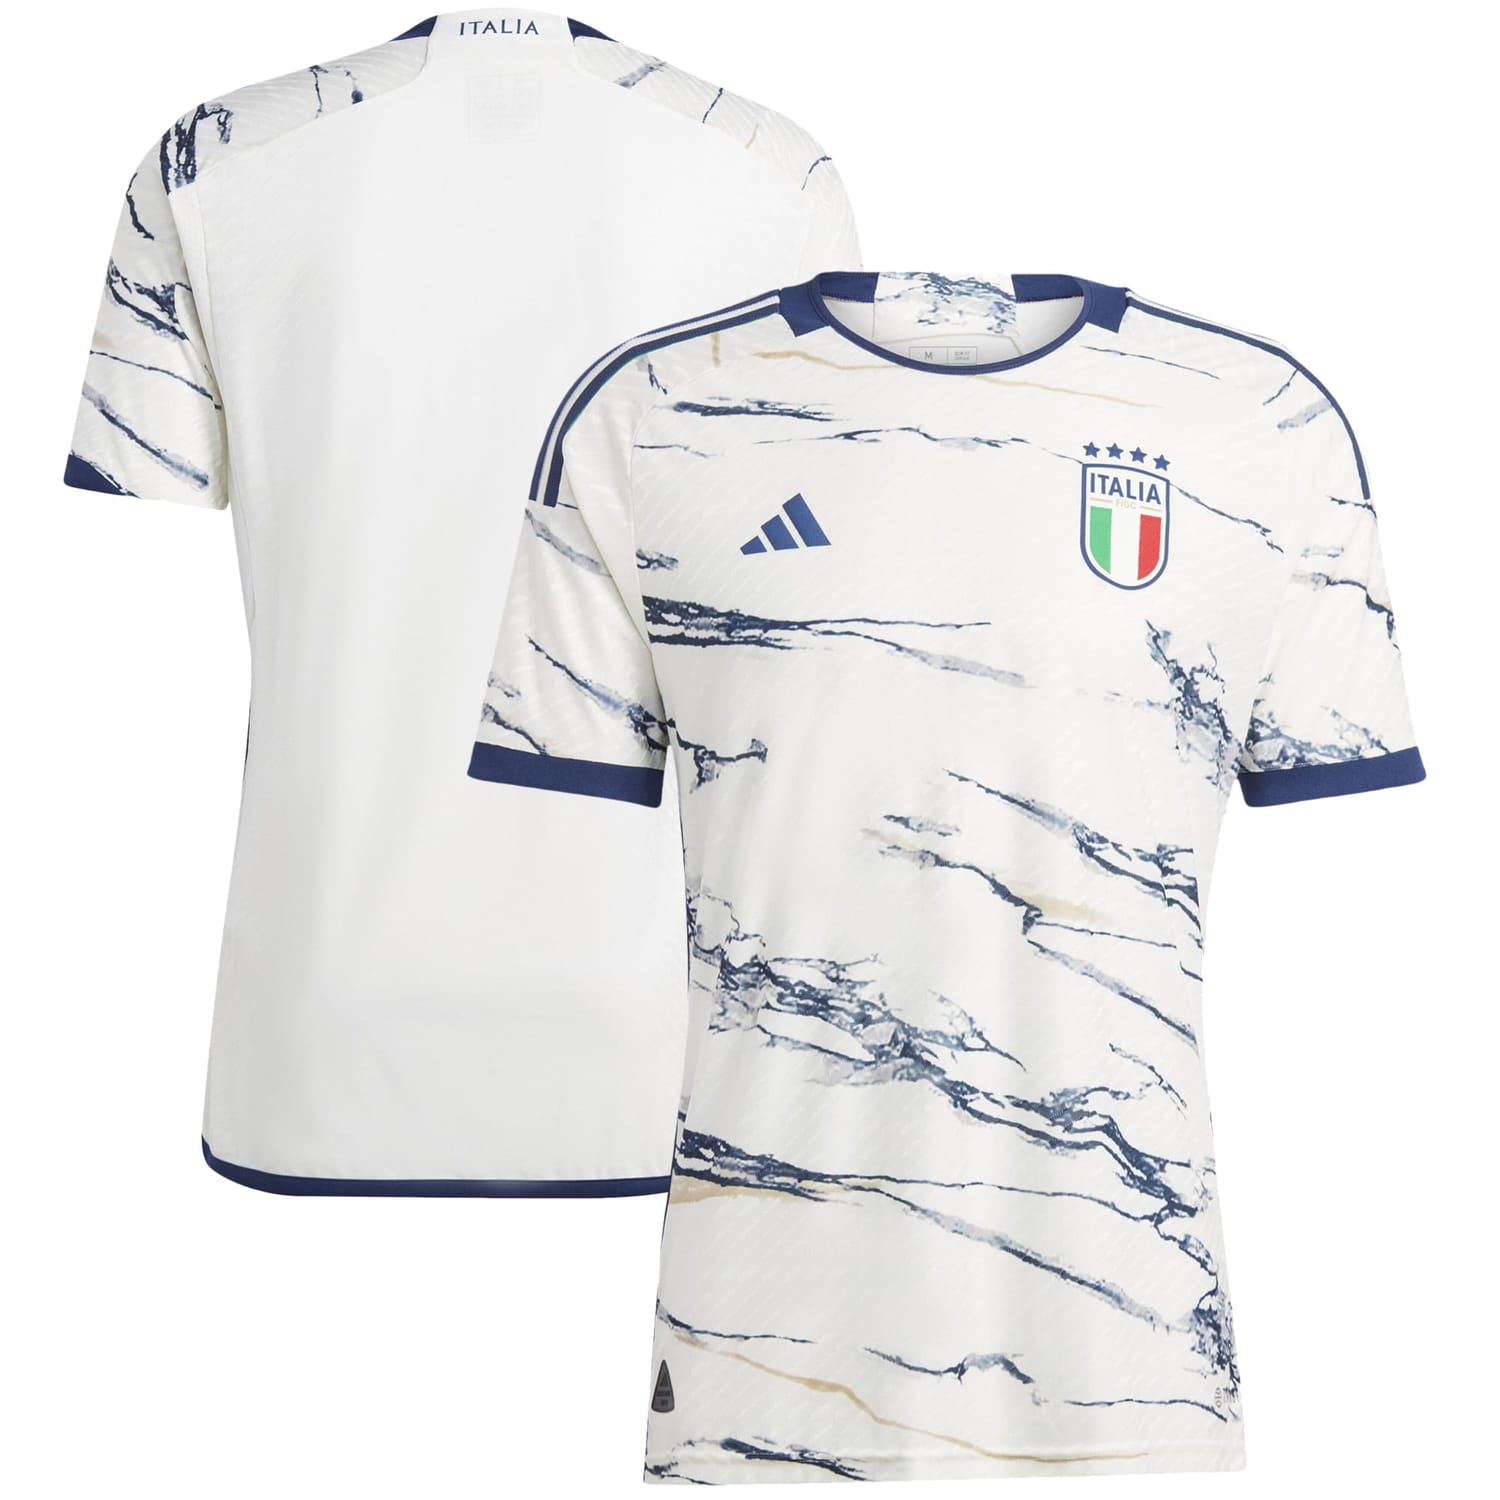 Italy National Team Away Authentic Jersey Shirt for Men